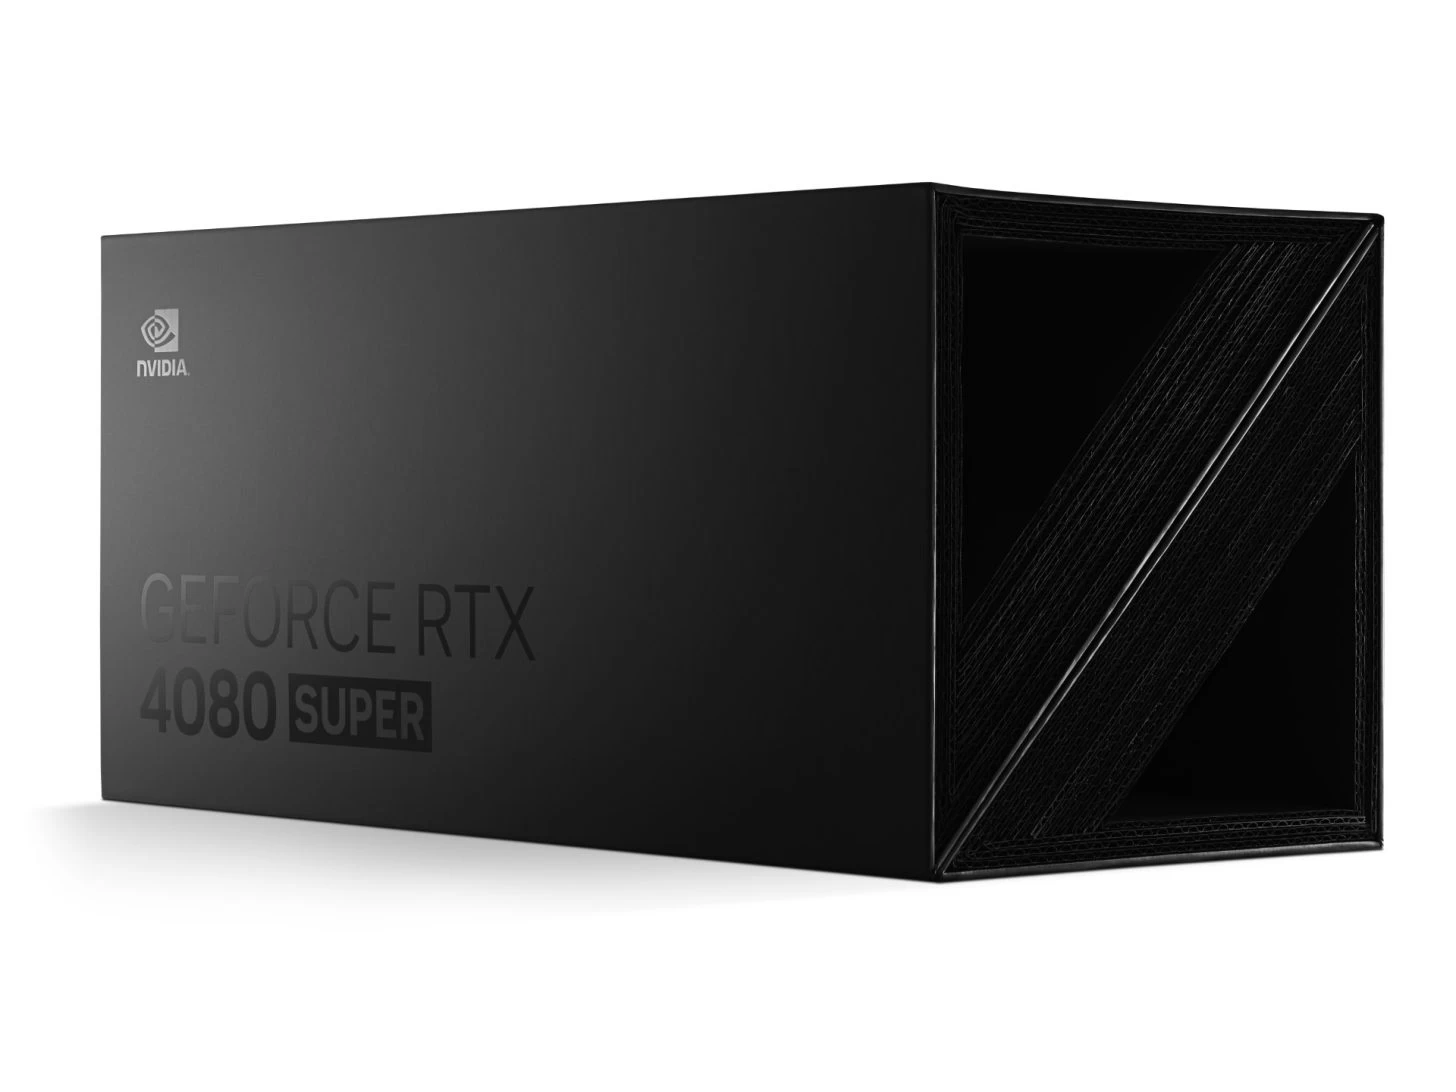 Nvidia GeForce RTX 4080 Super Founders Edition Package Content